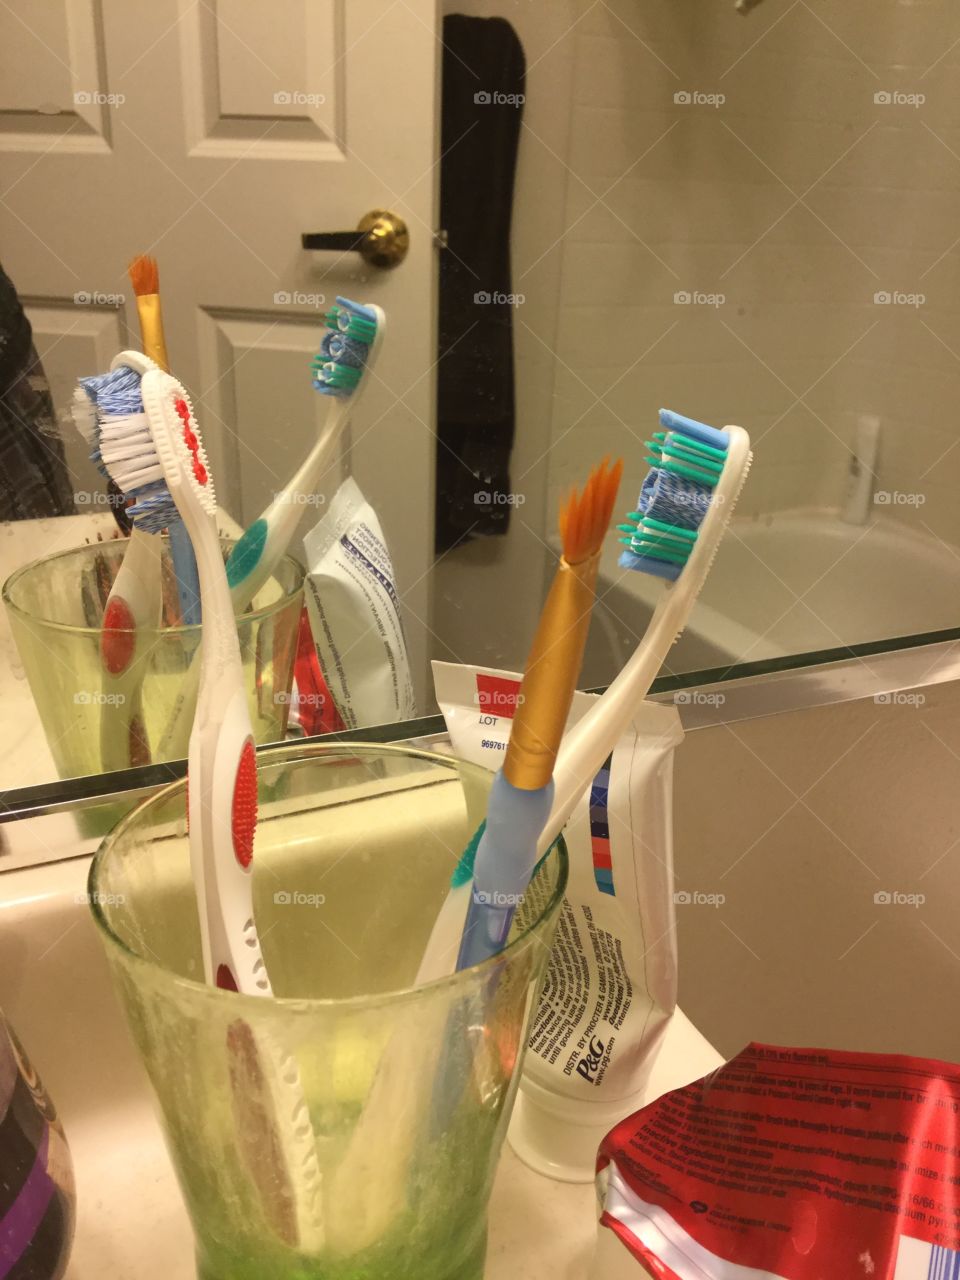 You know you live with an artist when the paint brushes hang out with the tooth brushes. 